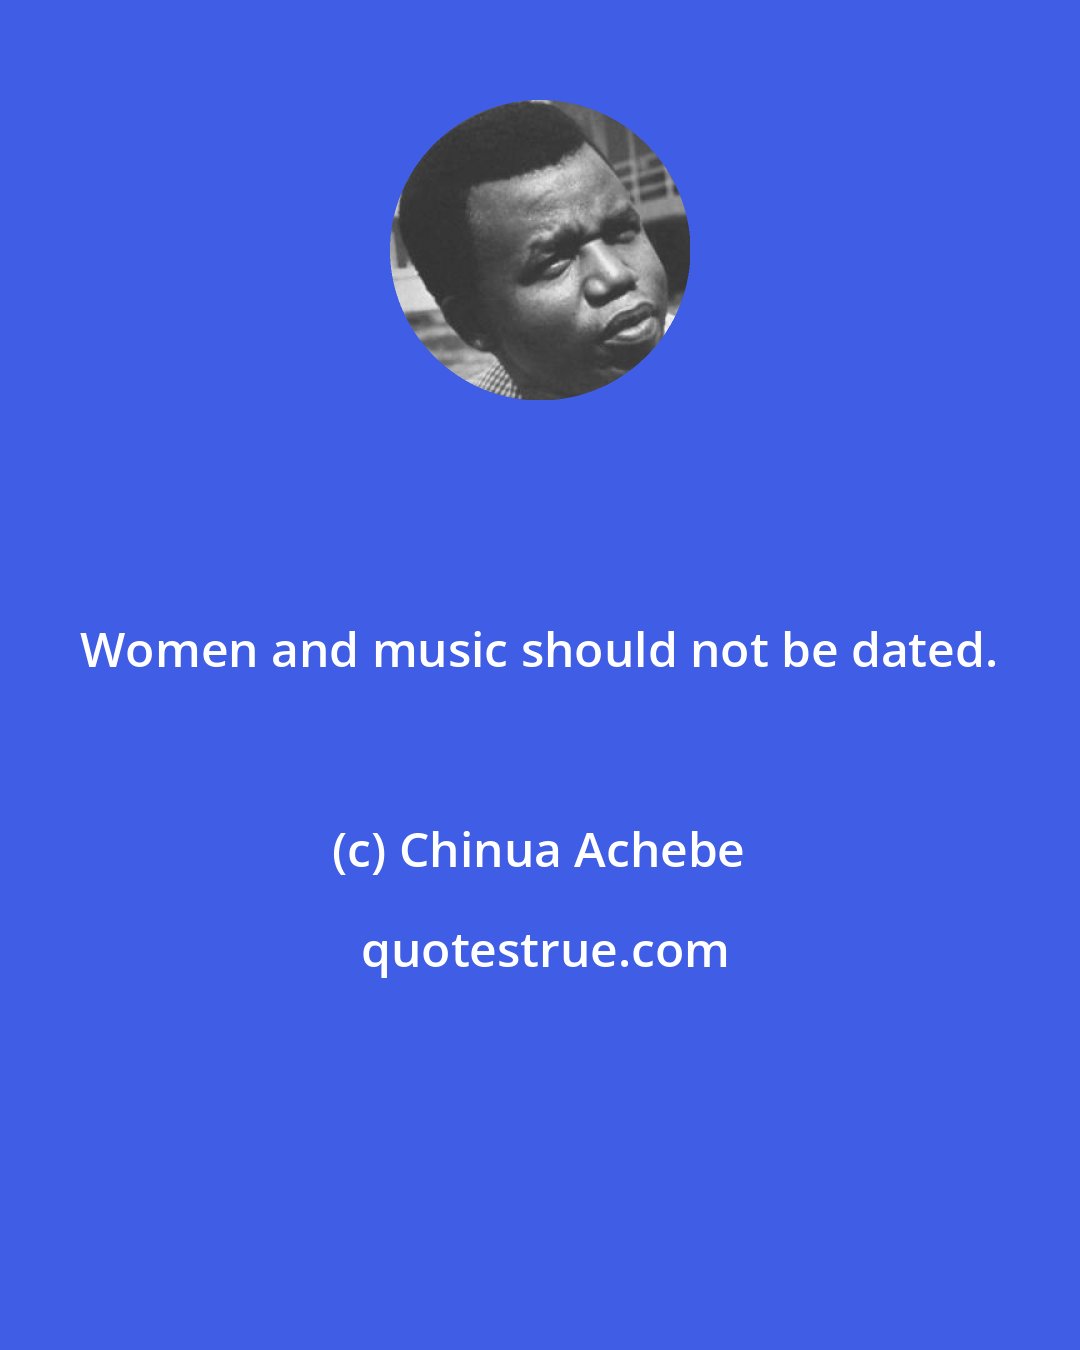 Chinua Achebe: Women and music should not be dated.